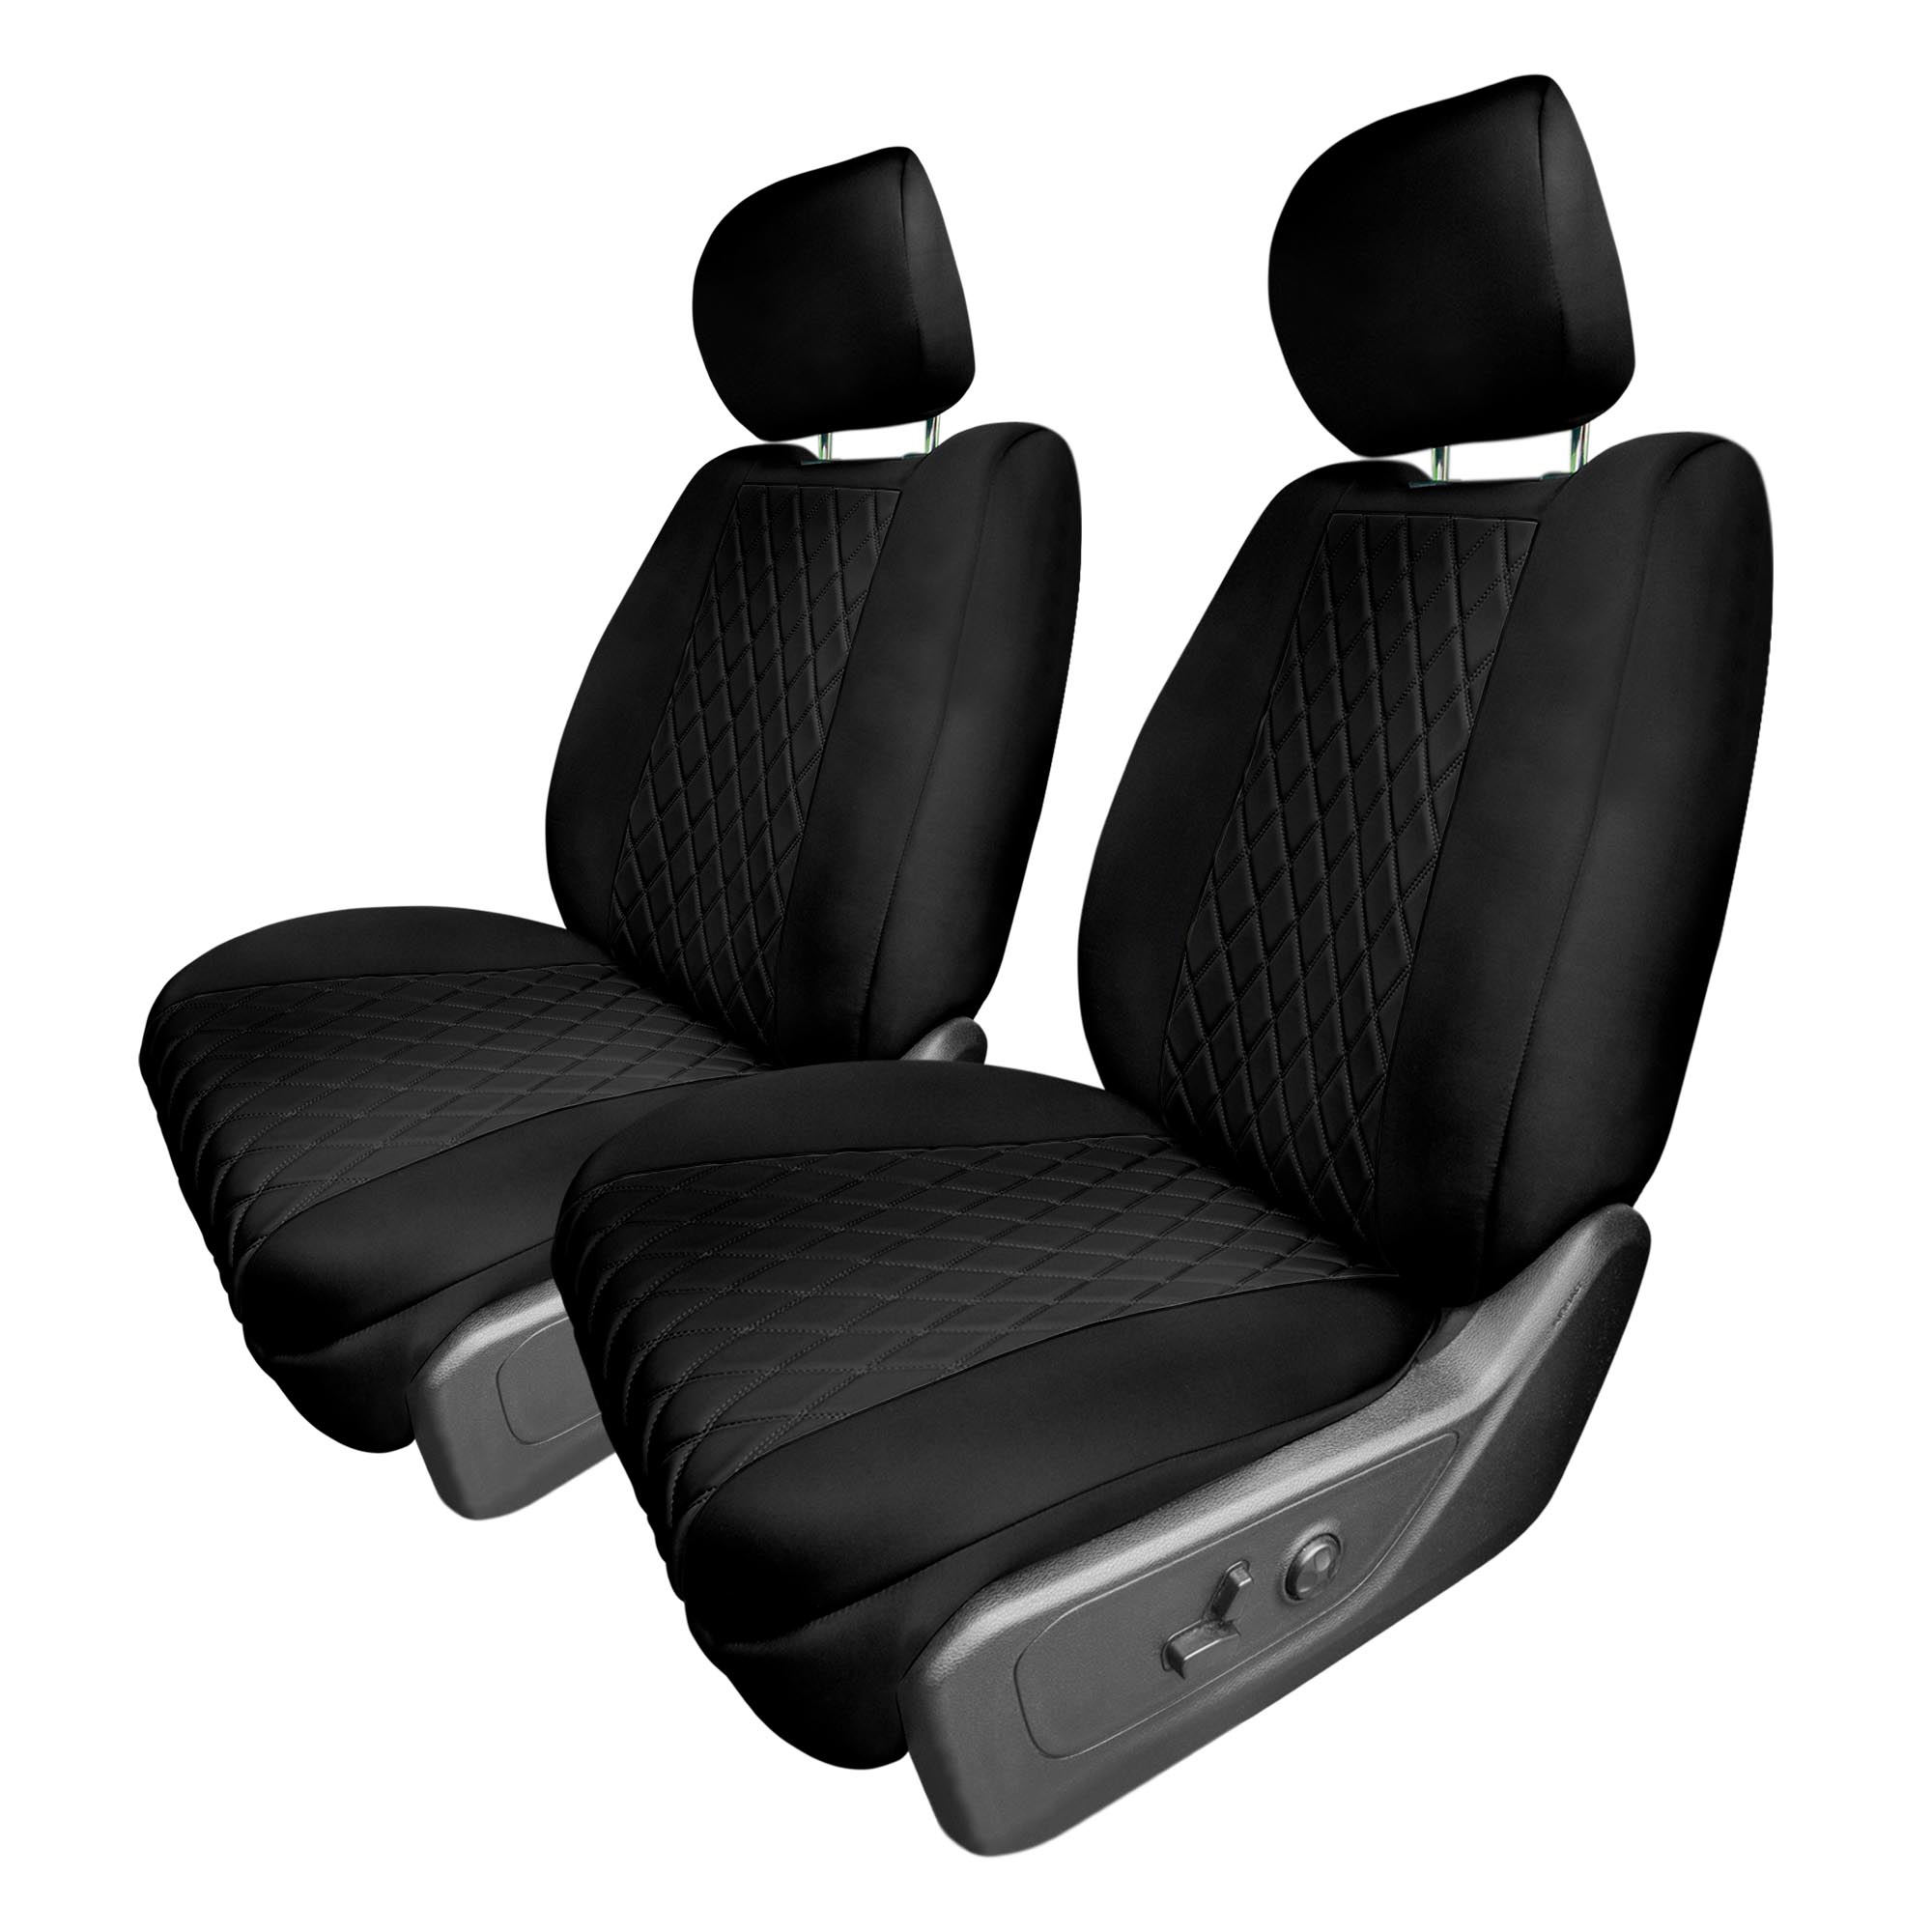 TLH Custom Fit Seat Covers for 2022-2024 Dodge RAM 1500, Seat Covers Front Set, Waterproof Car Seat Covers, Black Neoprene Seat Covers, Tailor-made Car Seat Covers for RAM Trucks - image 1 of 5